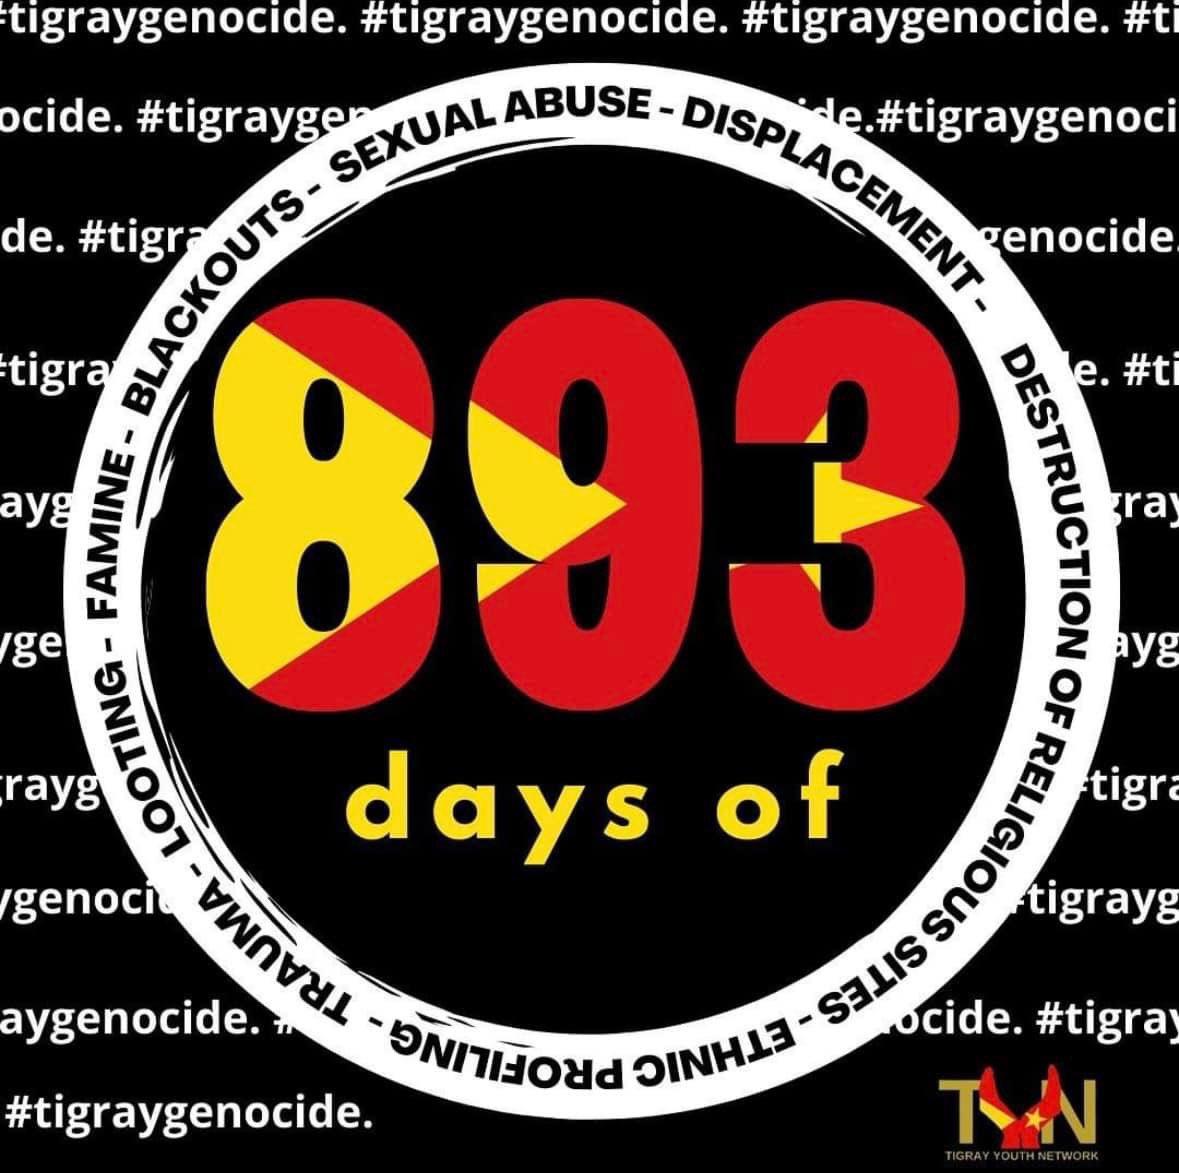 #893days of #TigrayGenocied 
⭕️ Still #TigrayIsBleeding: 
The situation in #Irob and #Kunama in #Tigray occupied and shelled by #Eritrea is devastating, with large scale displacement of the civilian population.
#FreeTigray 
#FreeIrobAndKunama 
@UN_HRC @UNOCHA @JosepBorrellF  @hrw